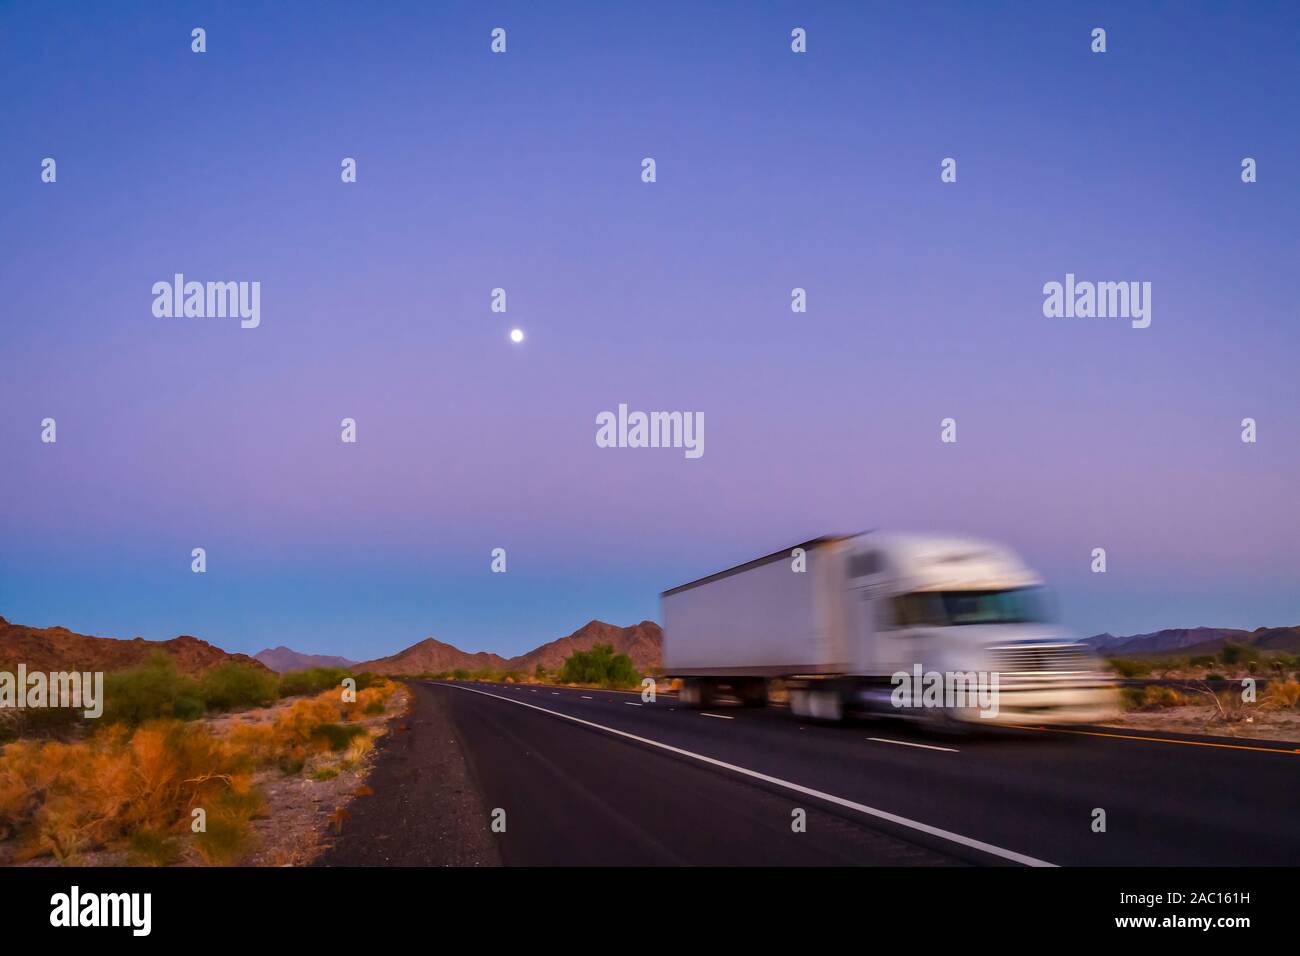 Deliberately blurred 18 wheel long haul truck on highway in desert at purple and blue sunrise with moon in the sky Stock Photo